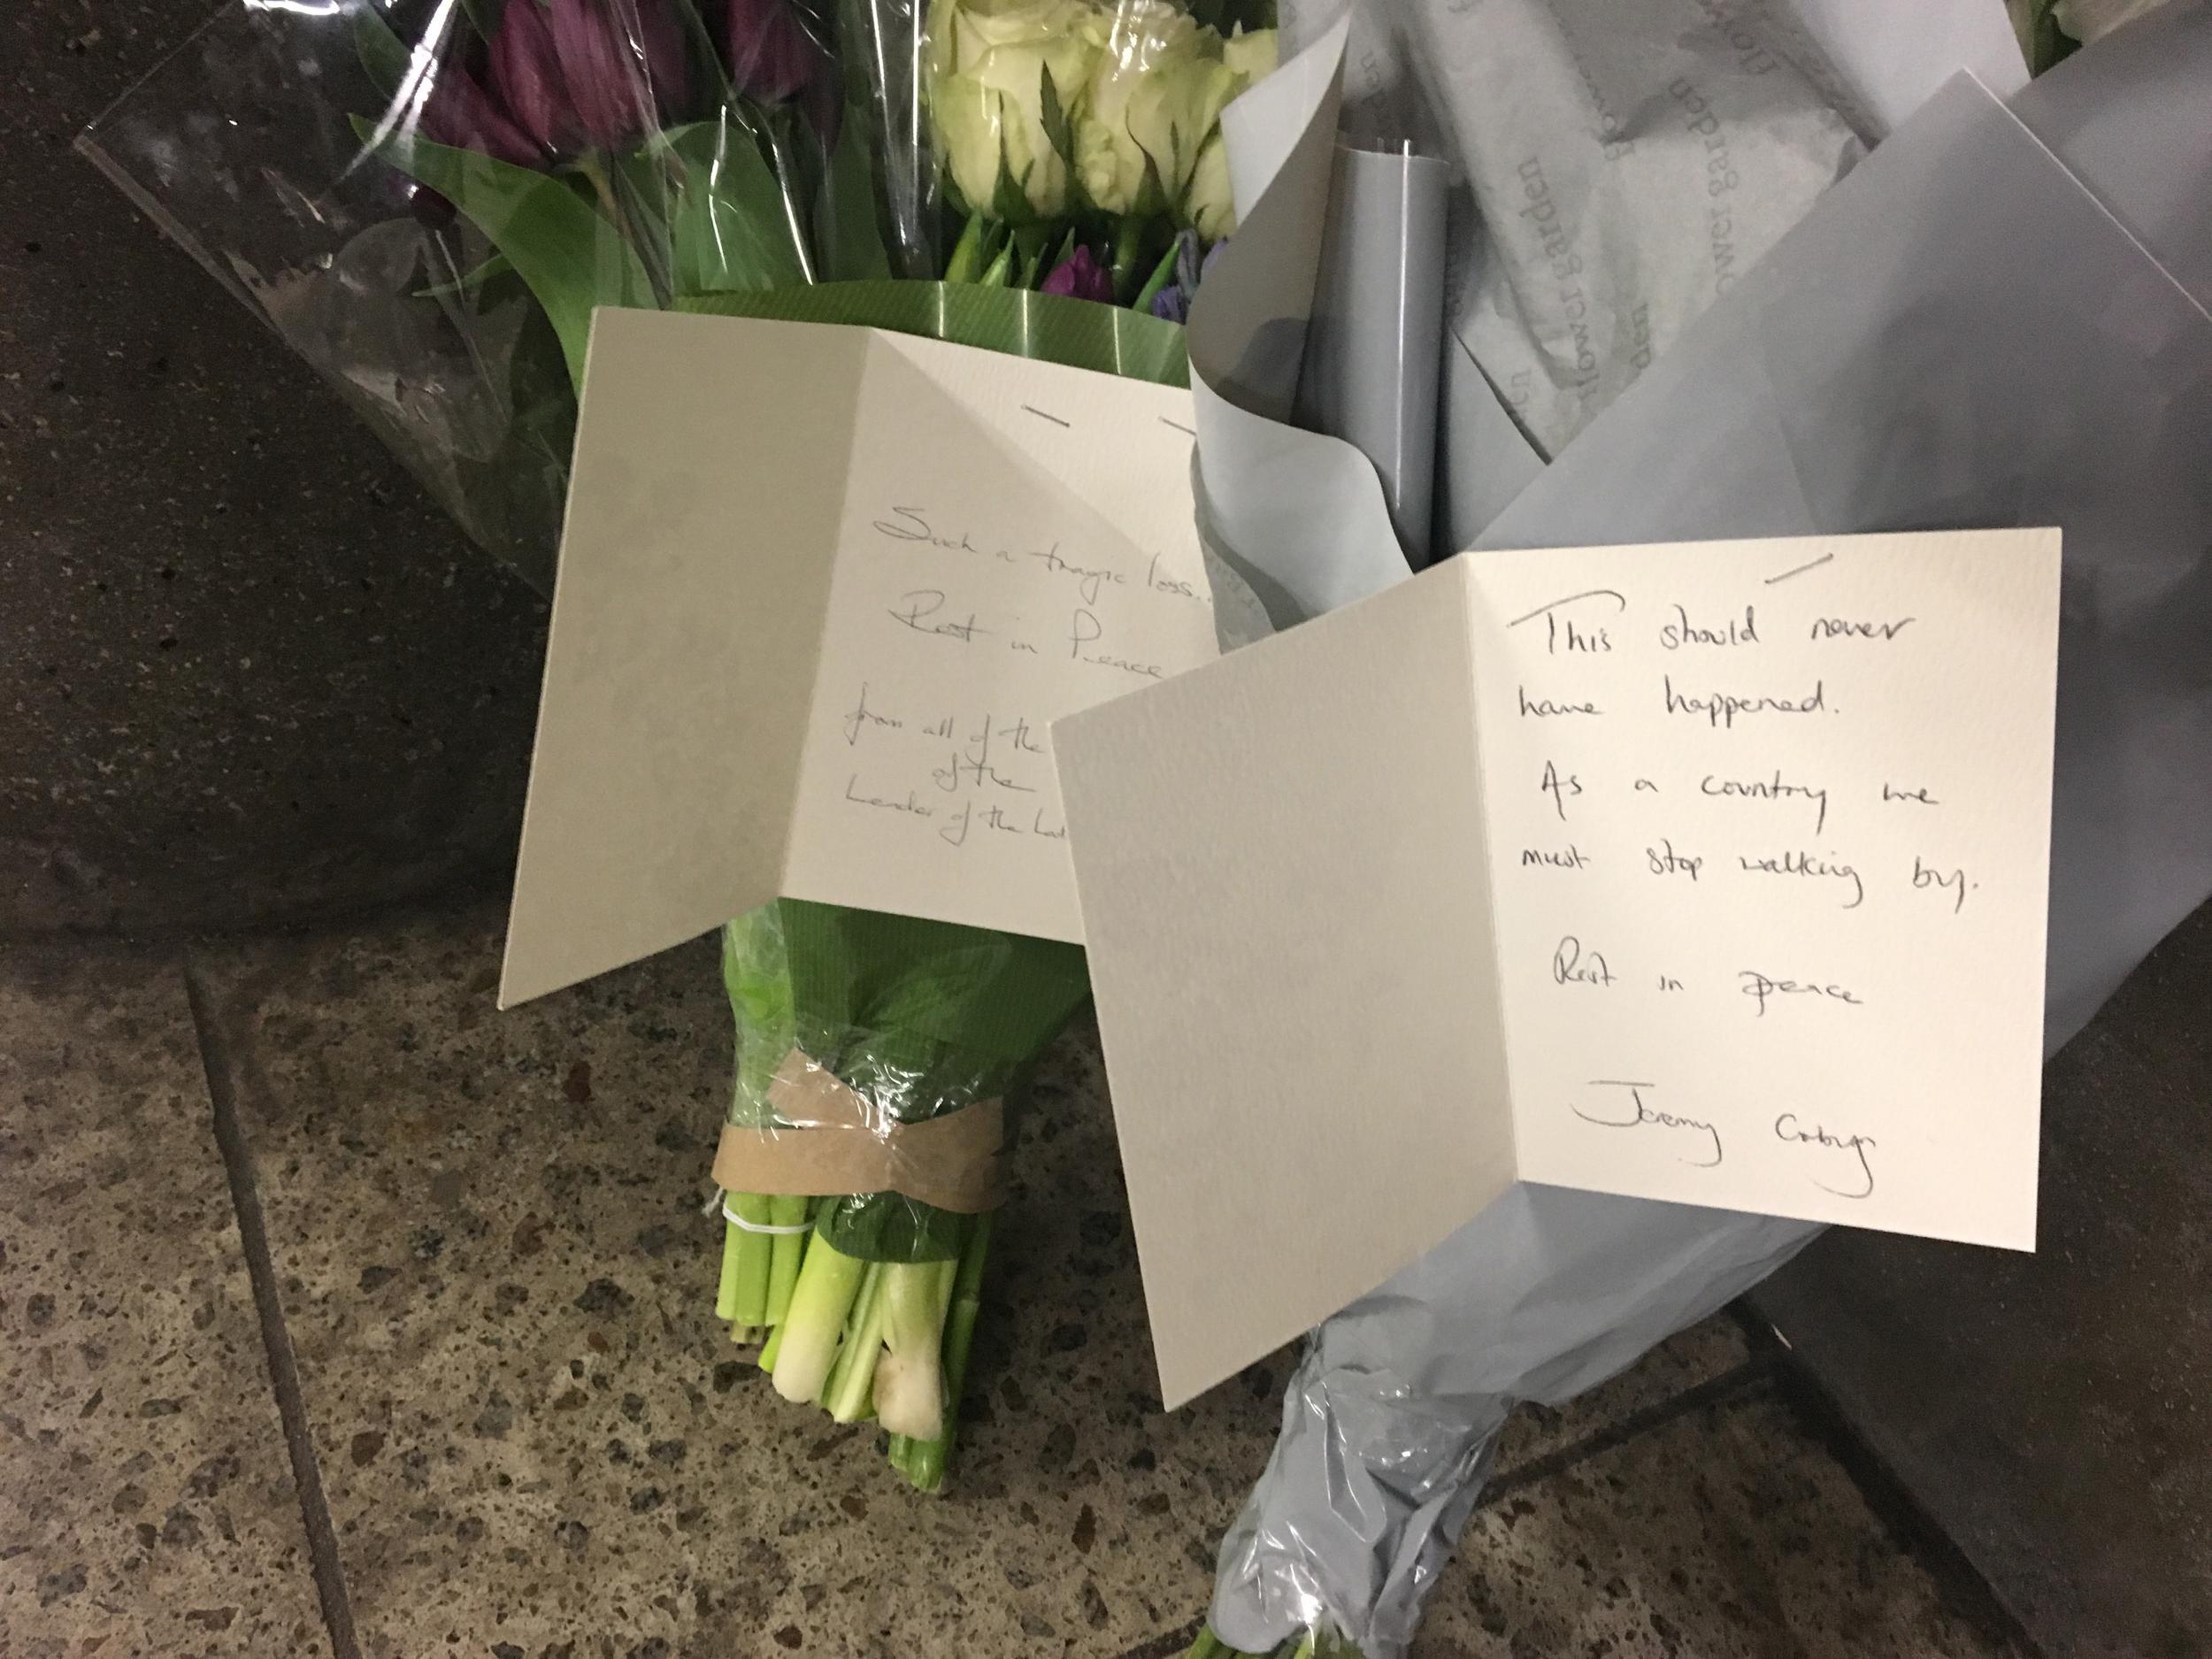 The Labour leader Jeremy Corbyn left flowers at the scene yesterday